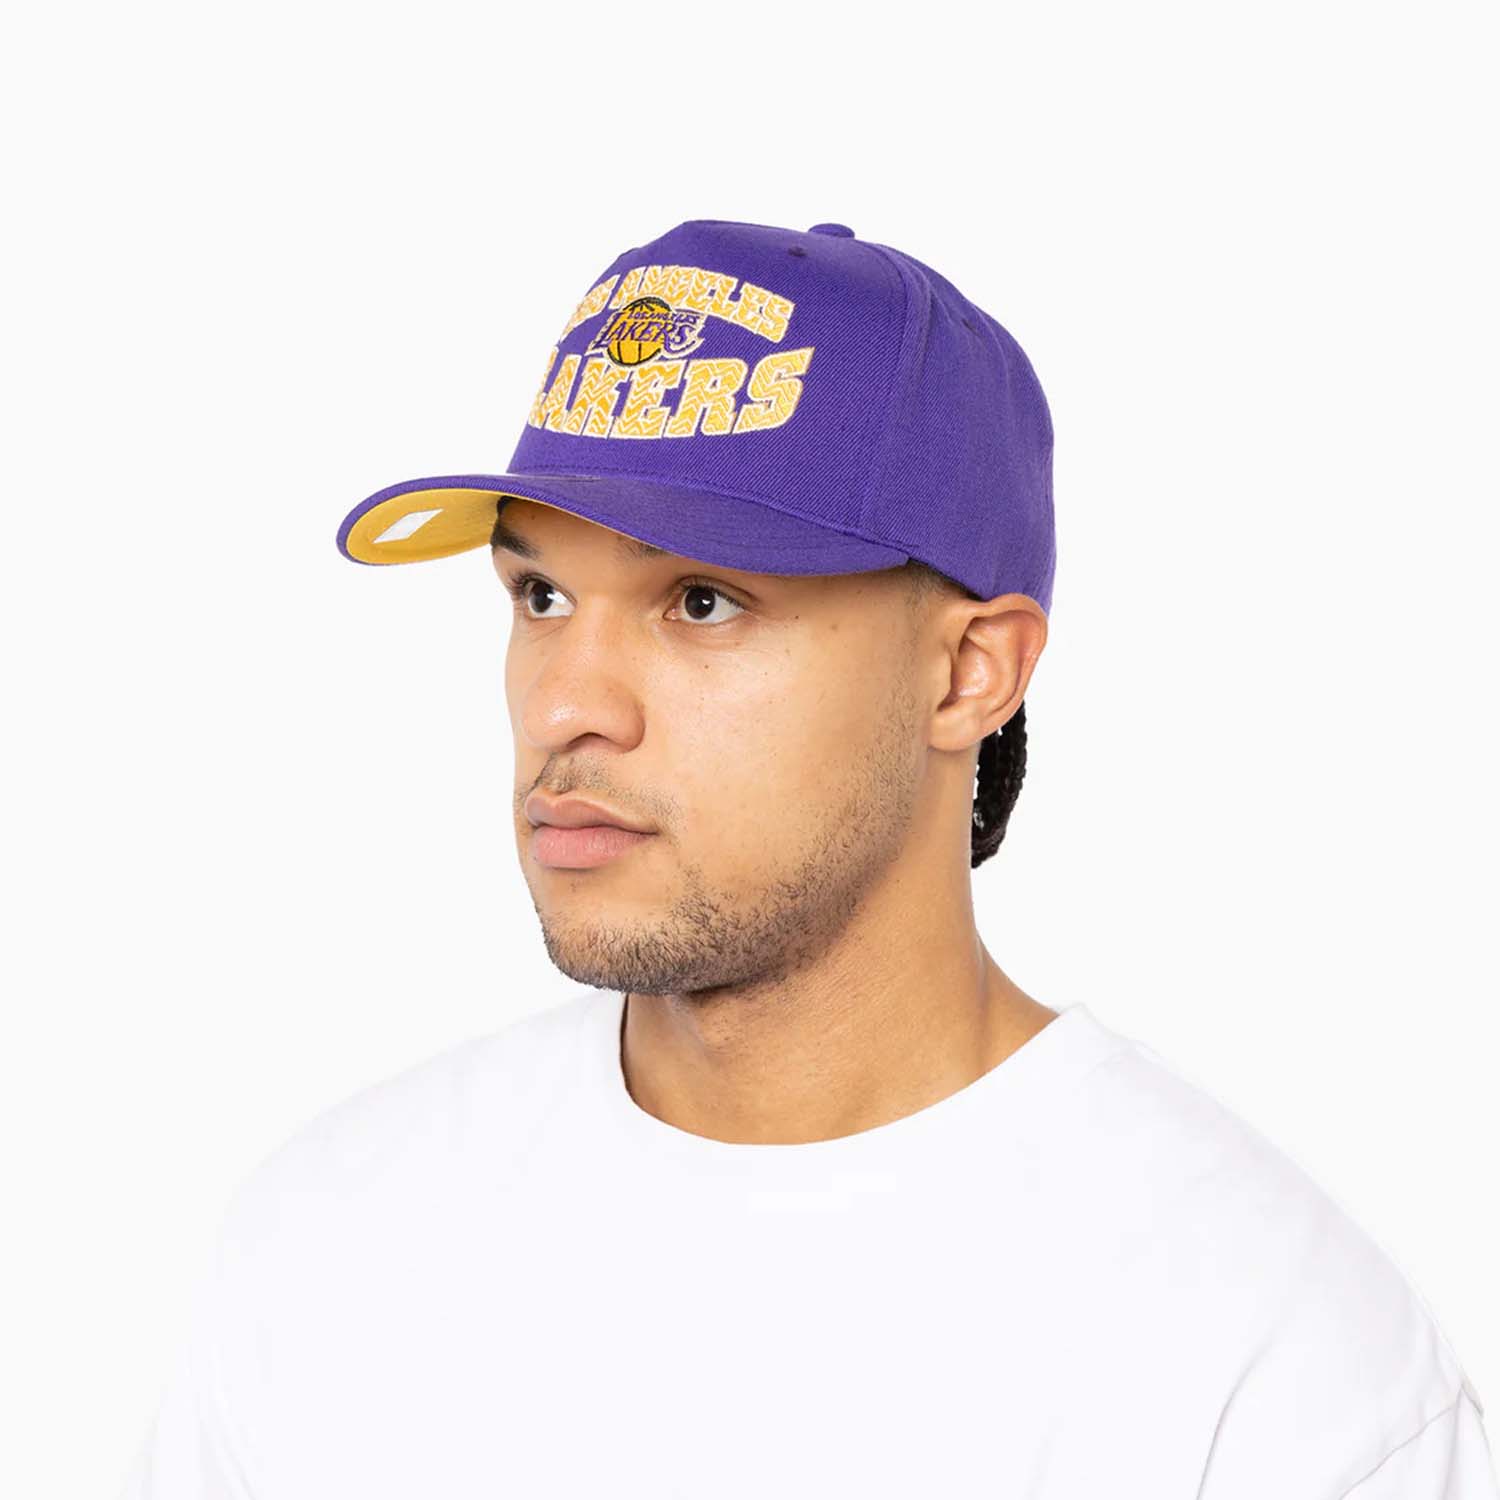 Mitchell & Ness - L.A LAKERS LAY UP CLASSIC SNAPBACK